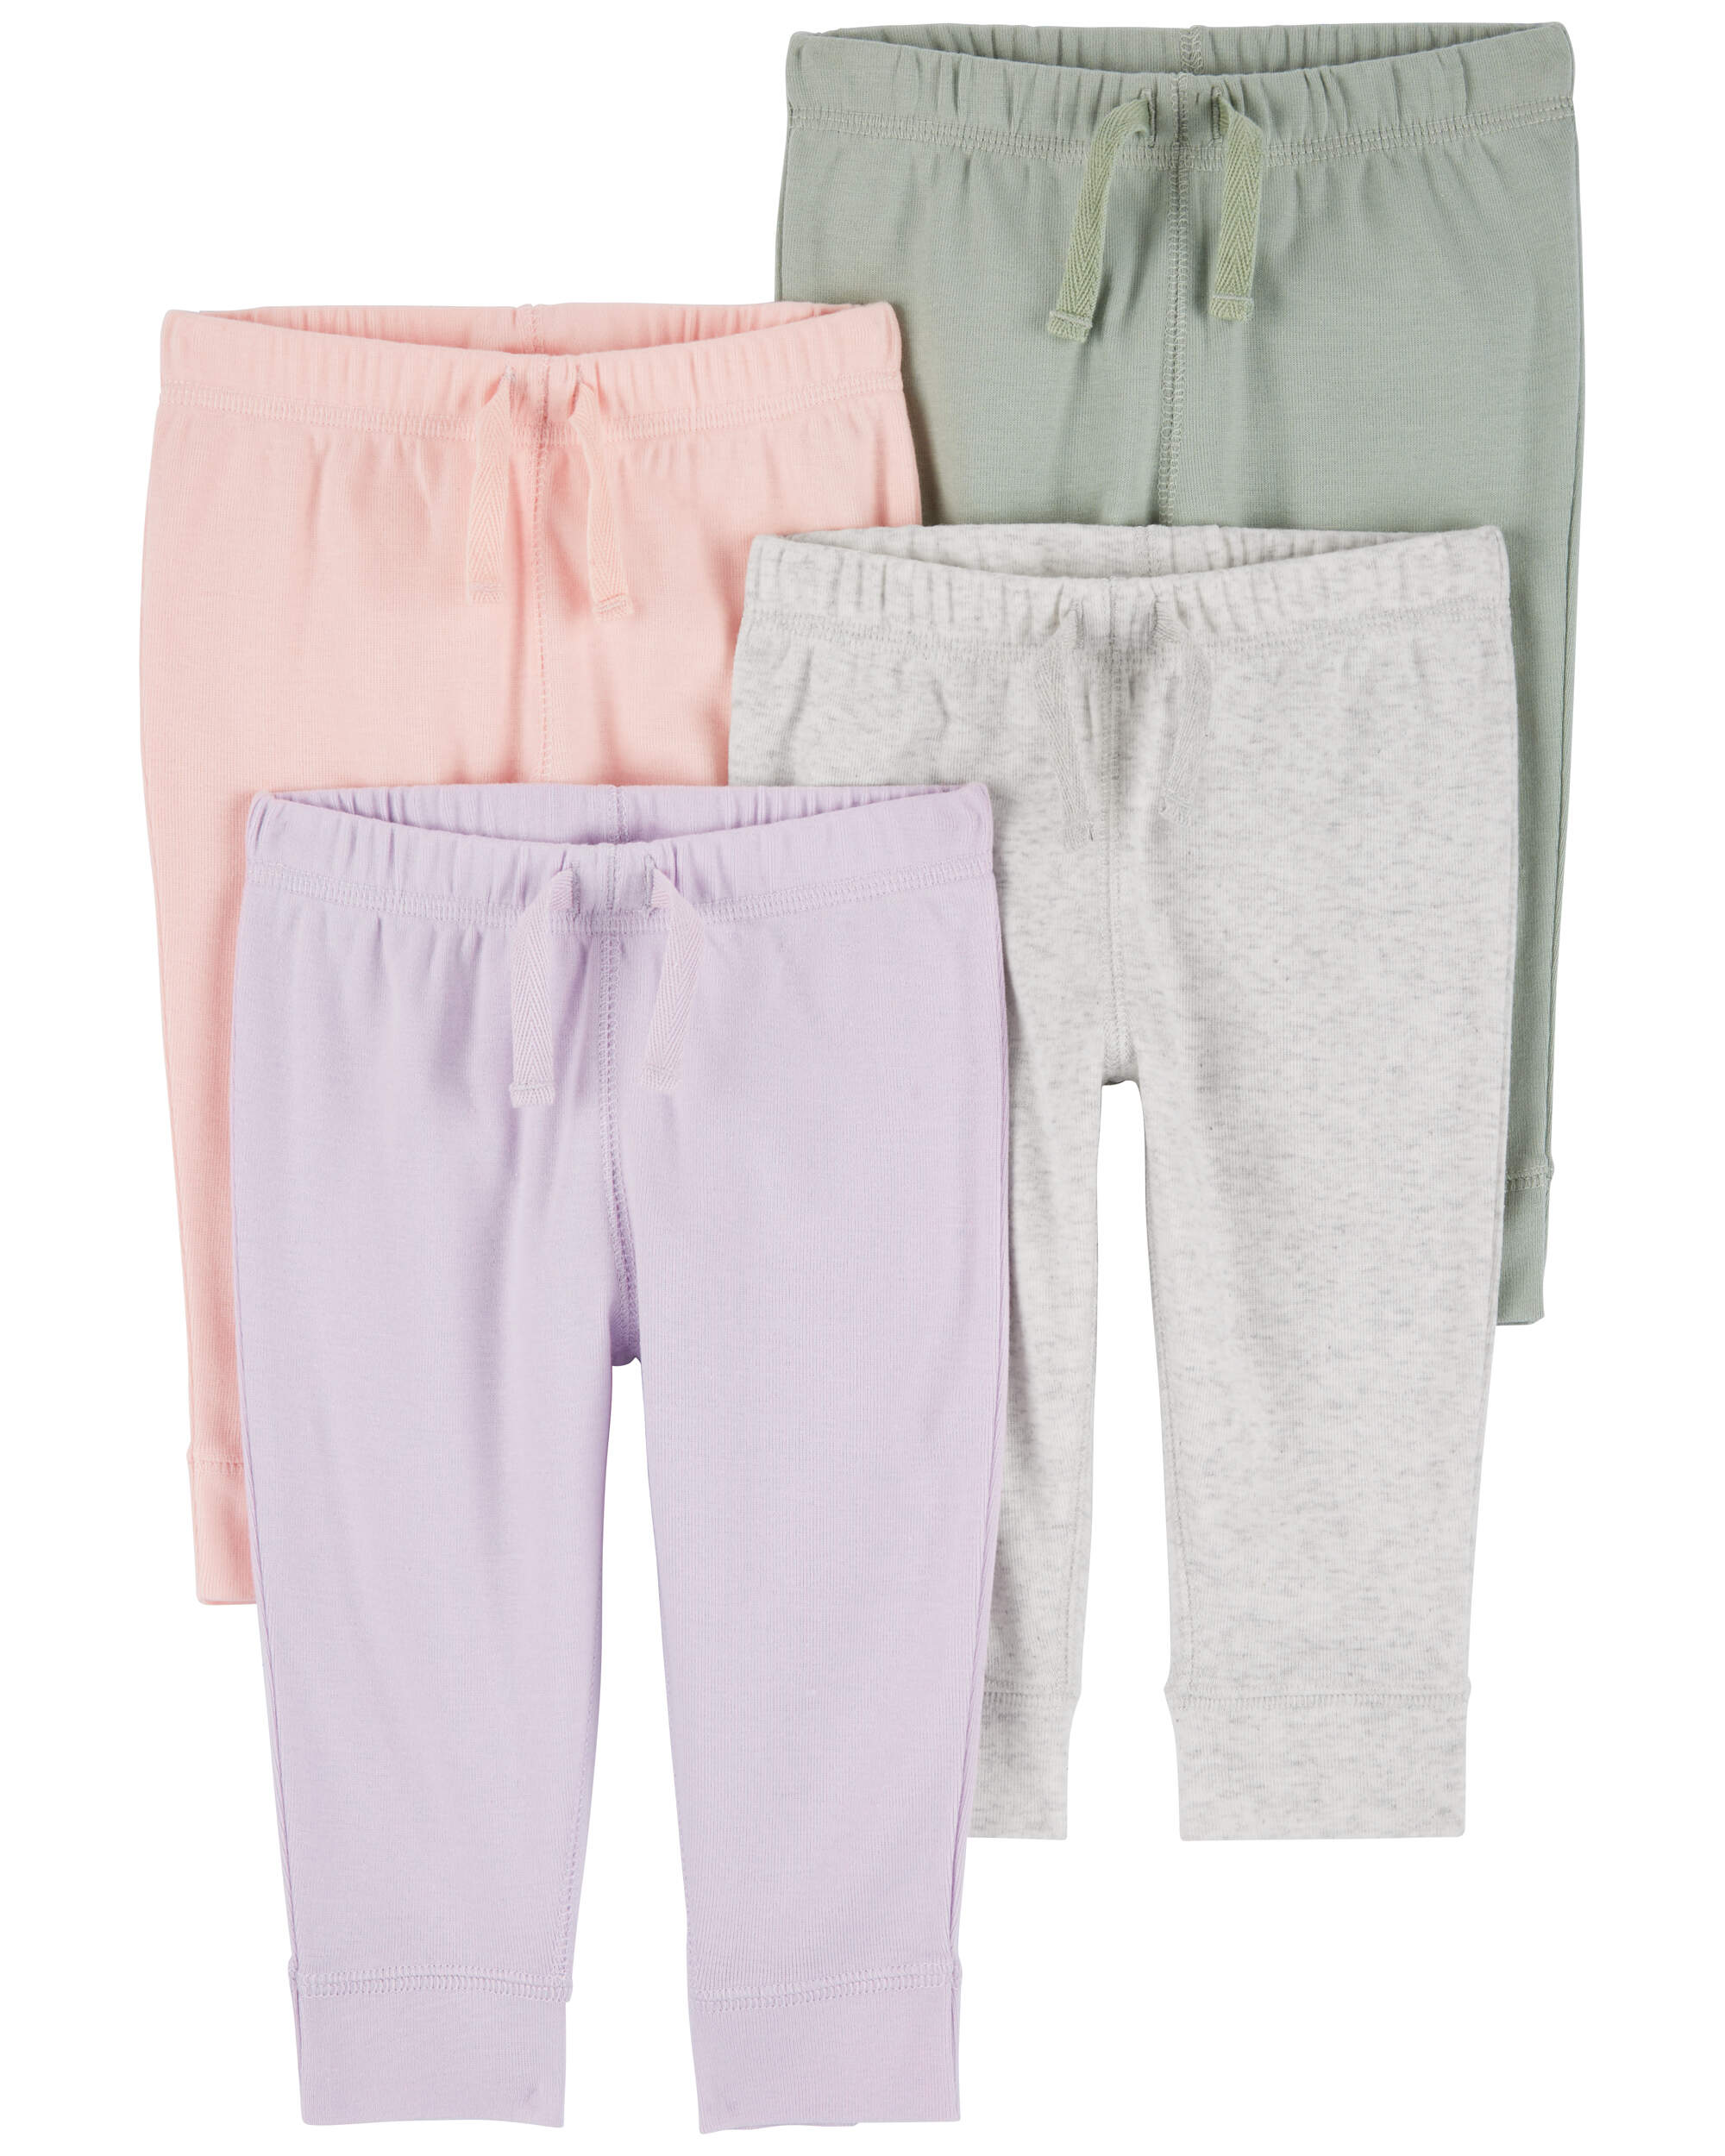 Baby 4-Pack Pull-On Pants